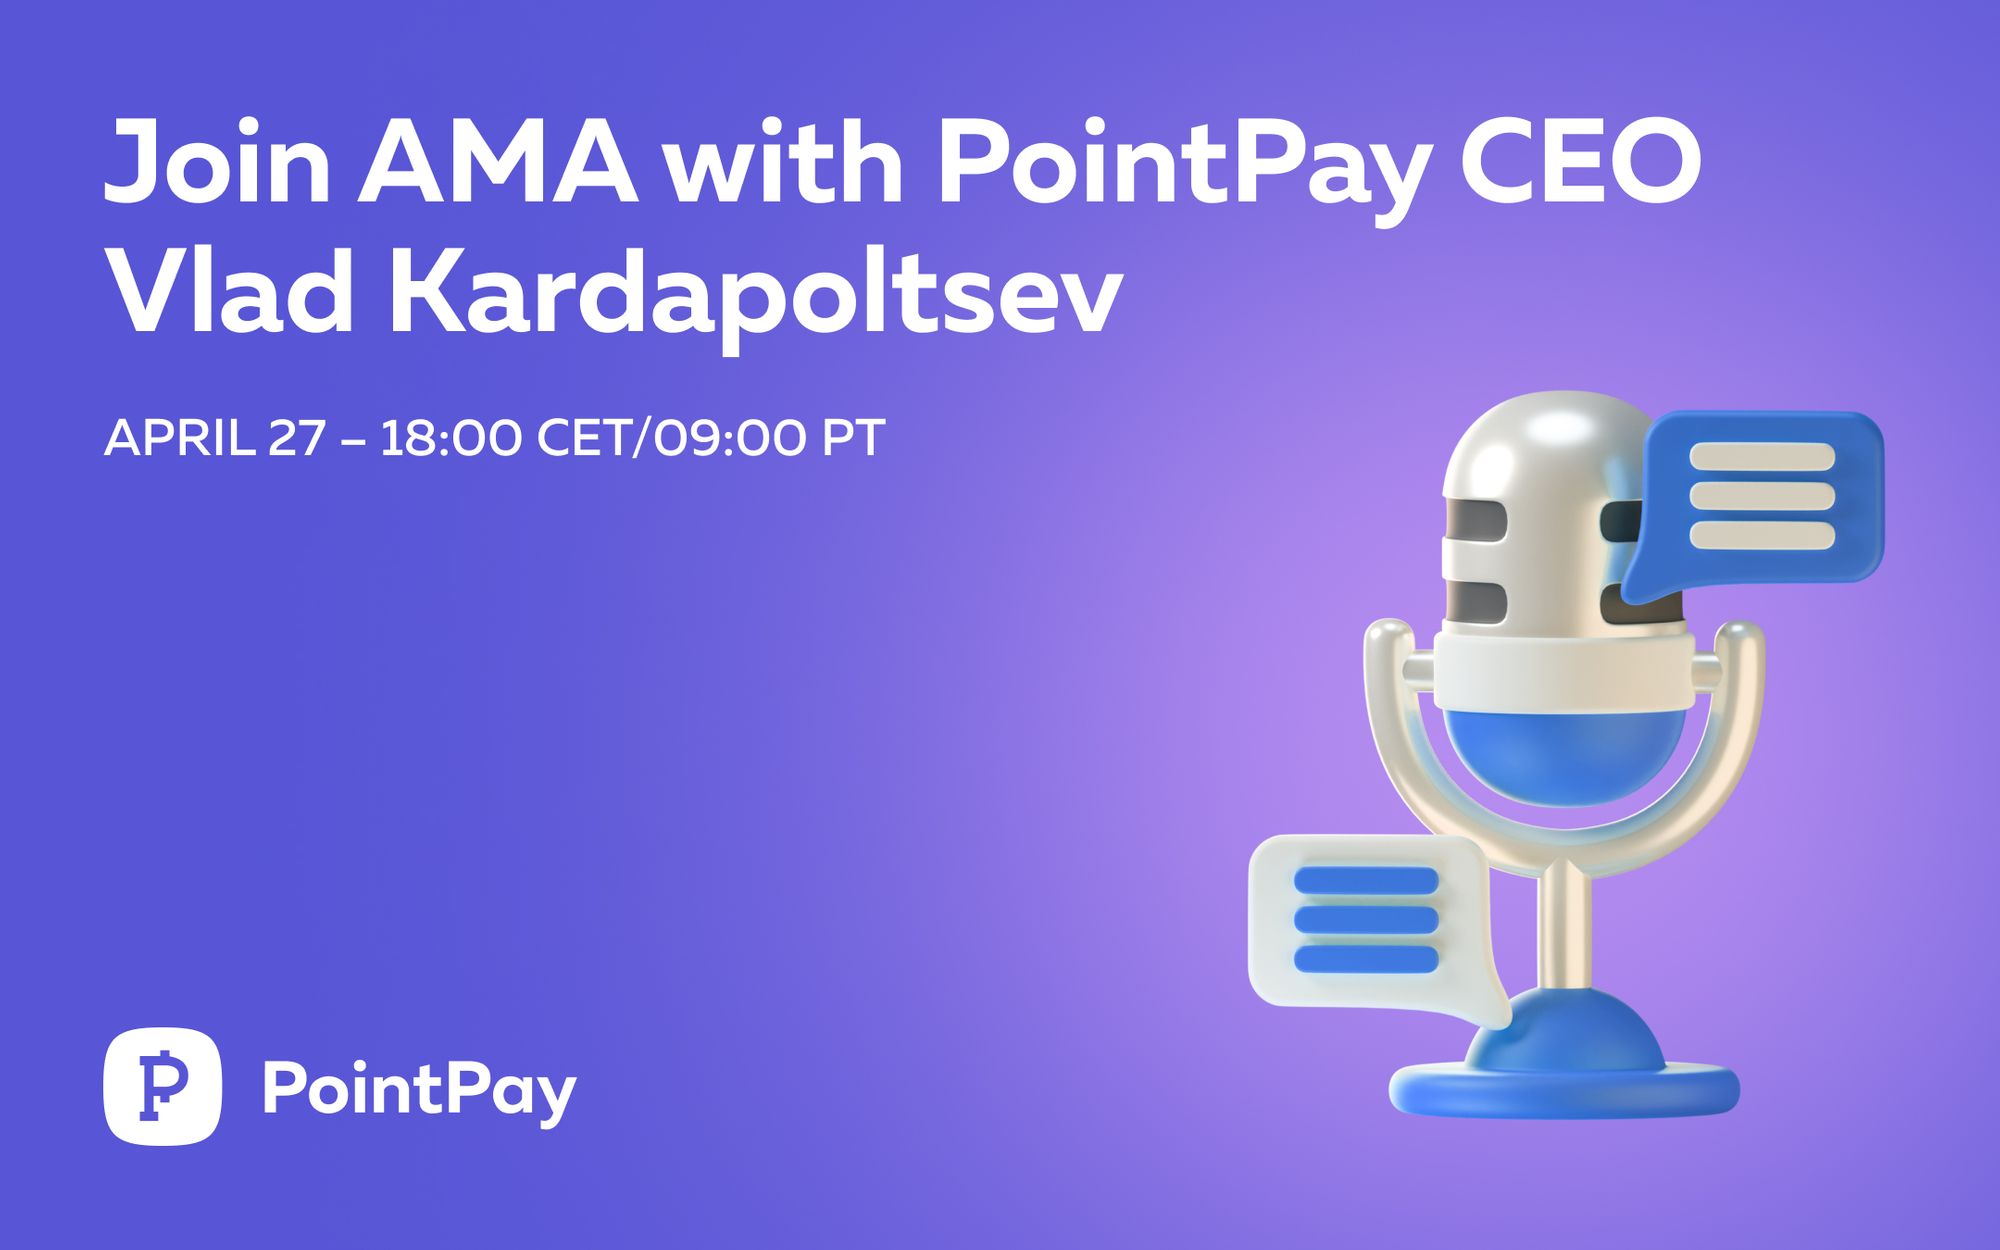 Join AMA with PointPay CEO Vladimir Kardapoltsev on April 27 (18:00 CET time)